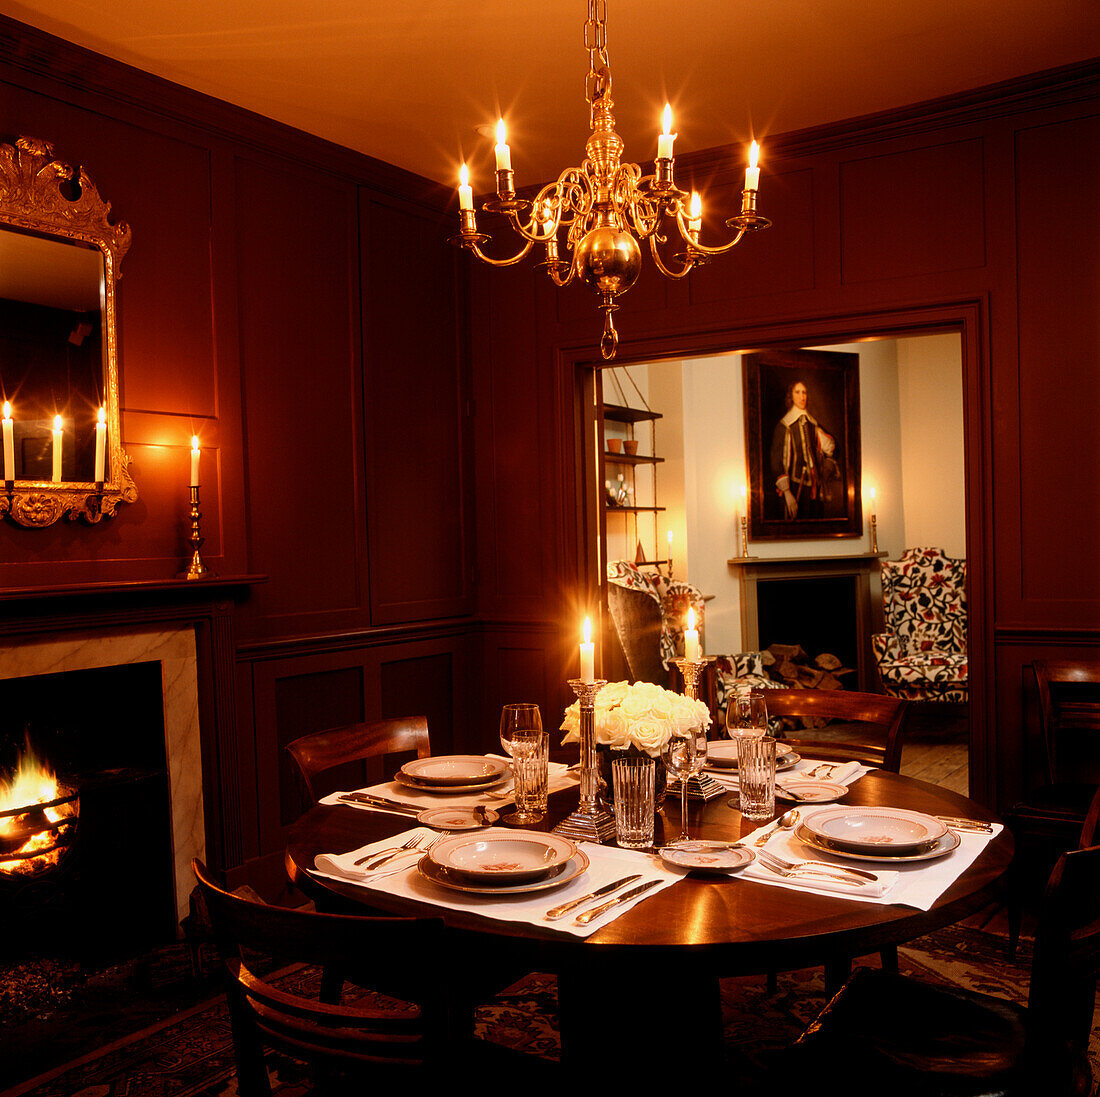 Candlelit dinner set in reddish brown wood panelled dining room with views of the wing armchairs in sitting room